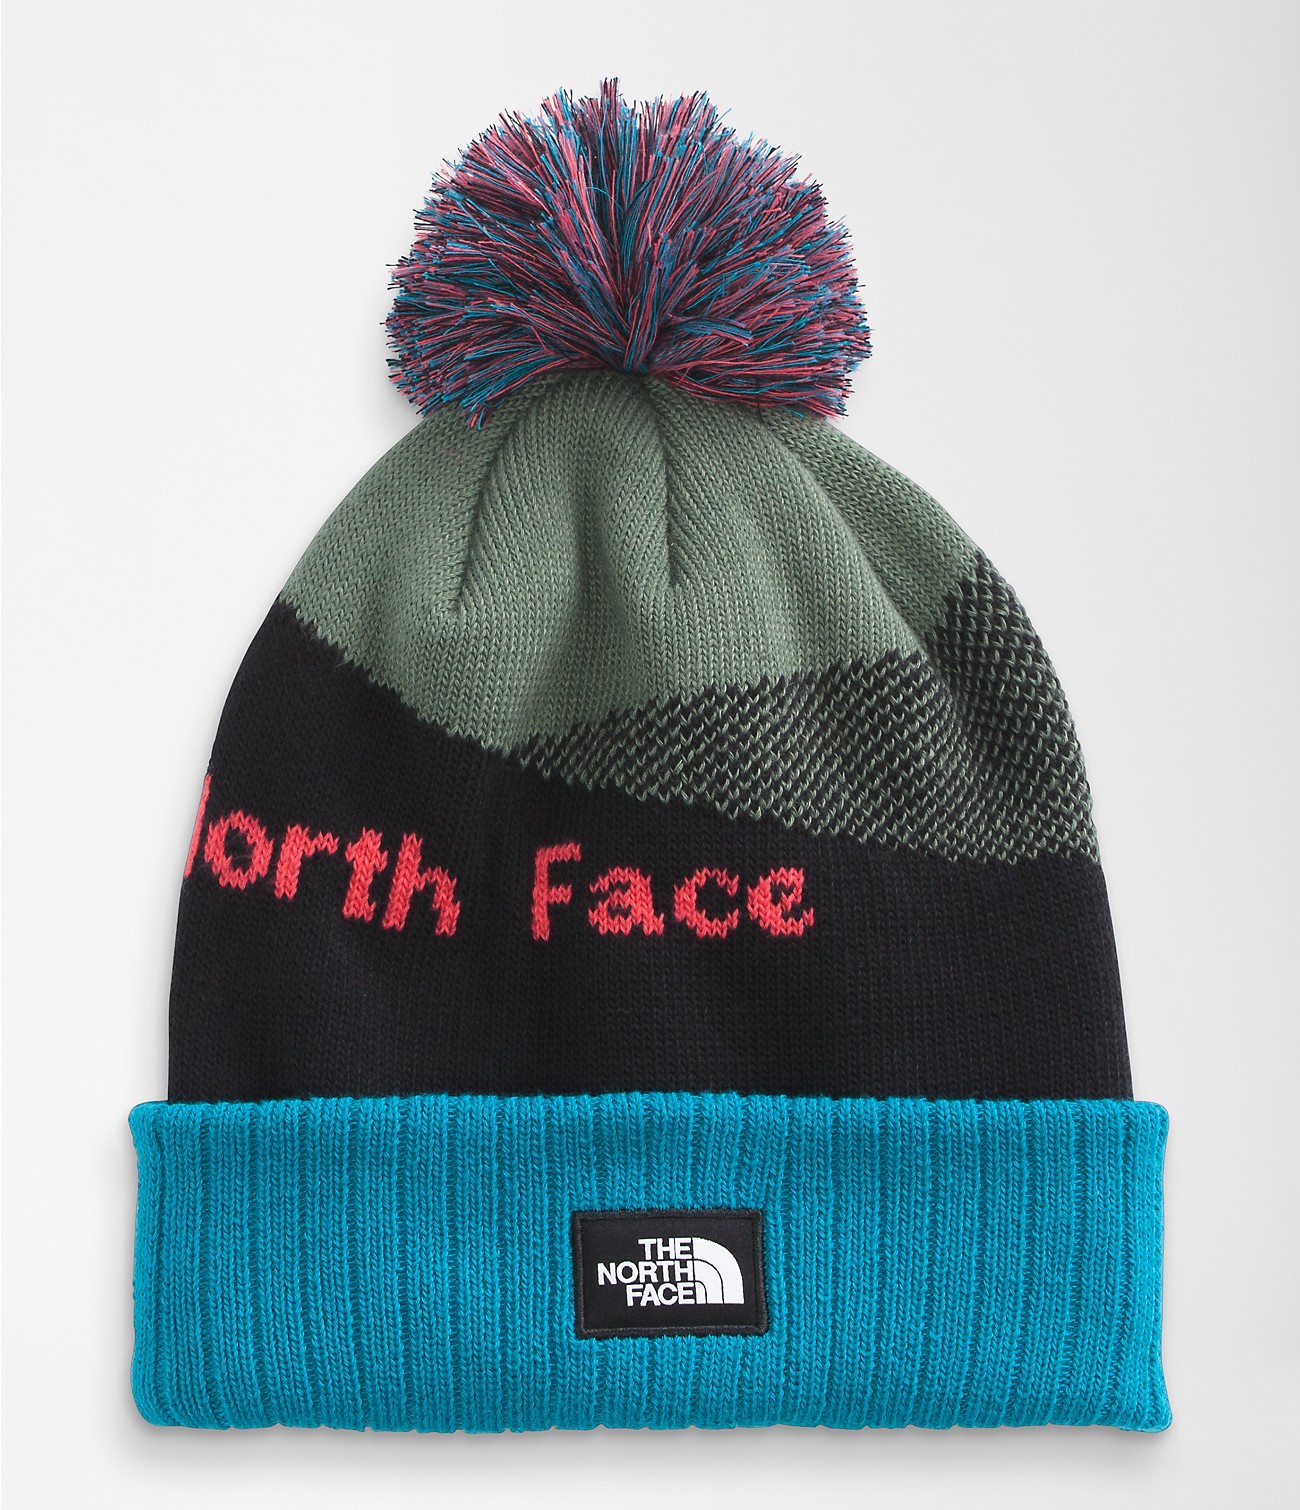 Recycled Pom Pom | The North Face